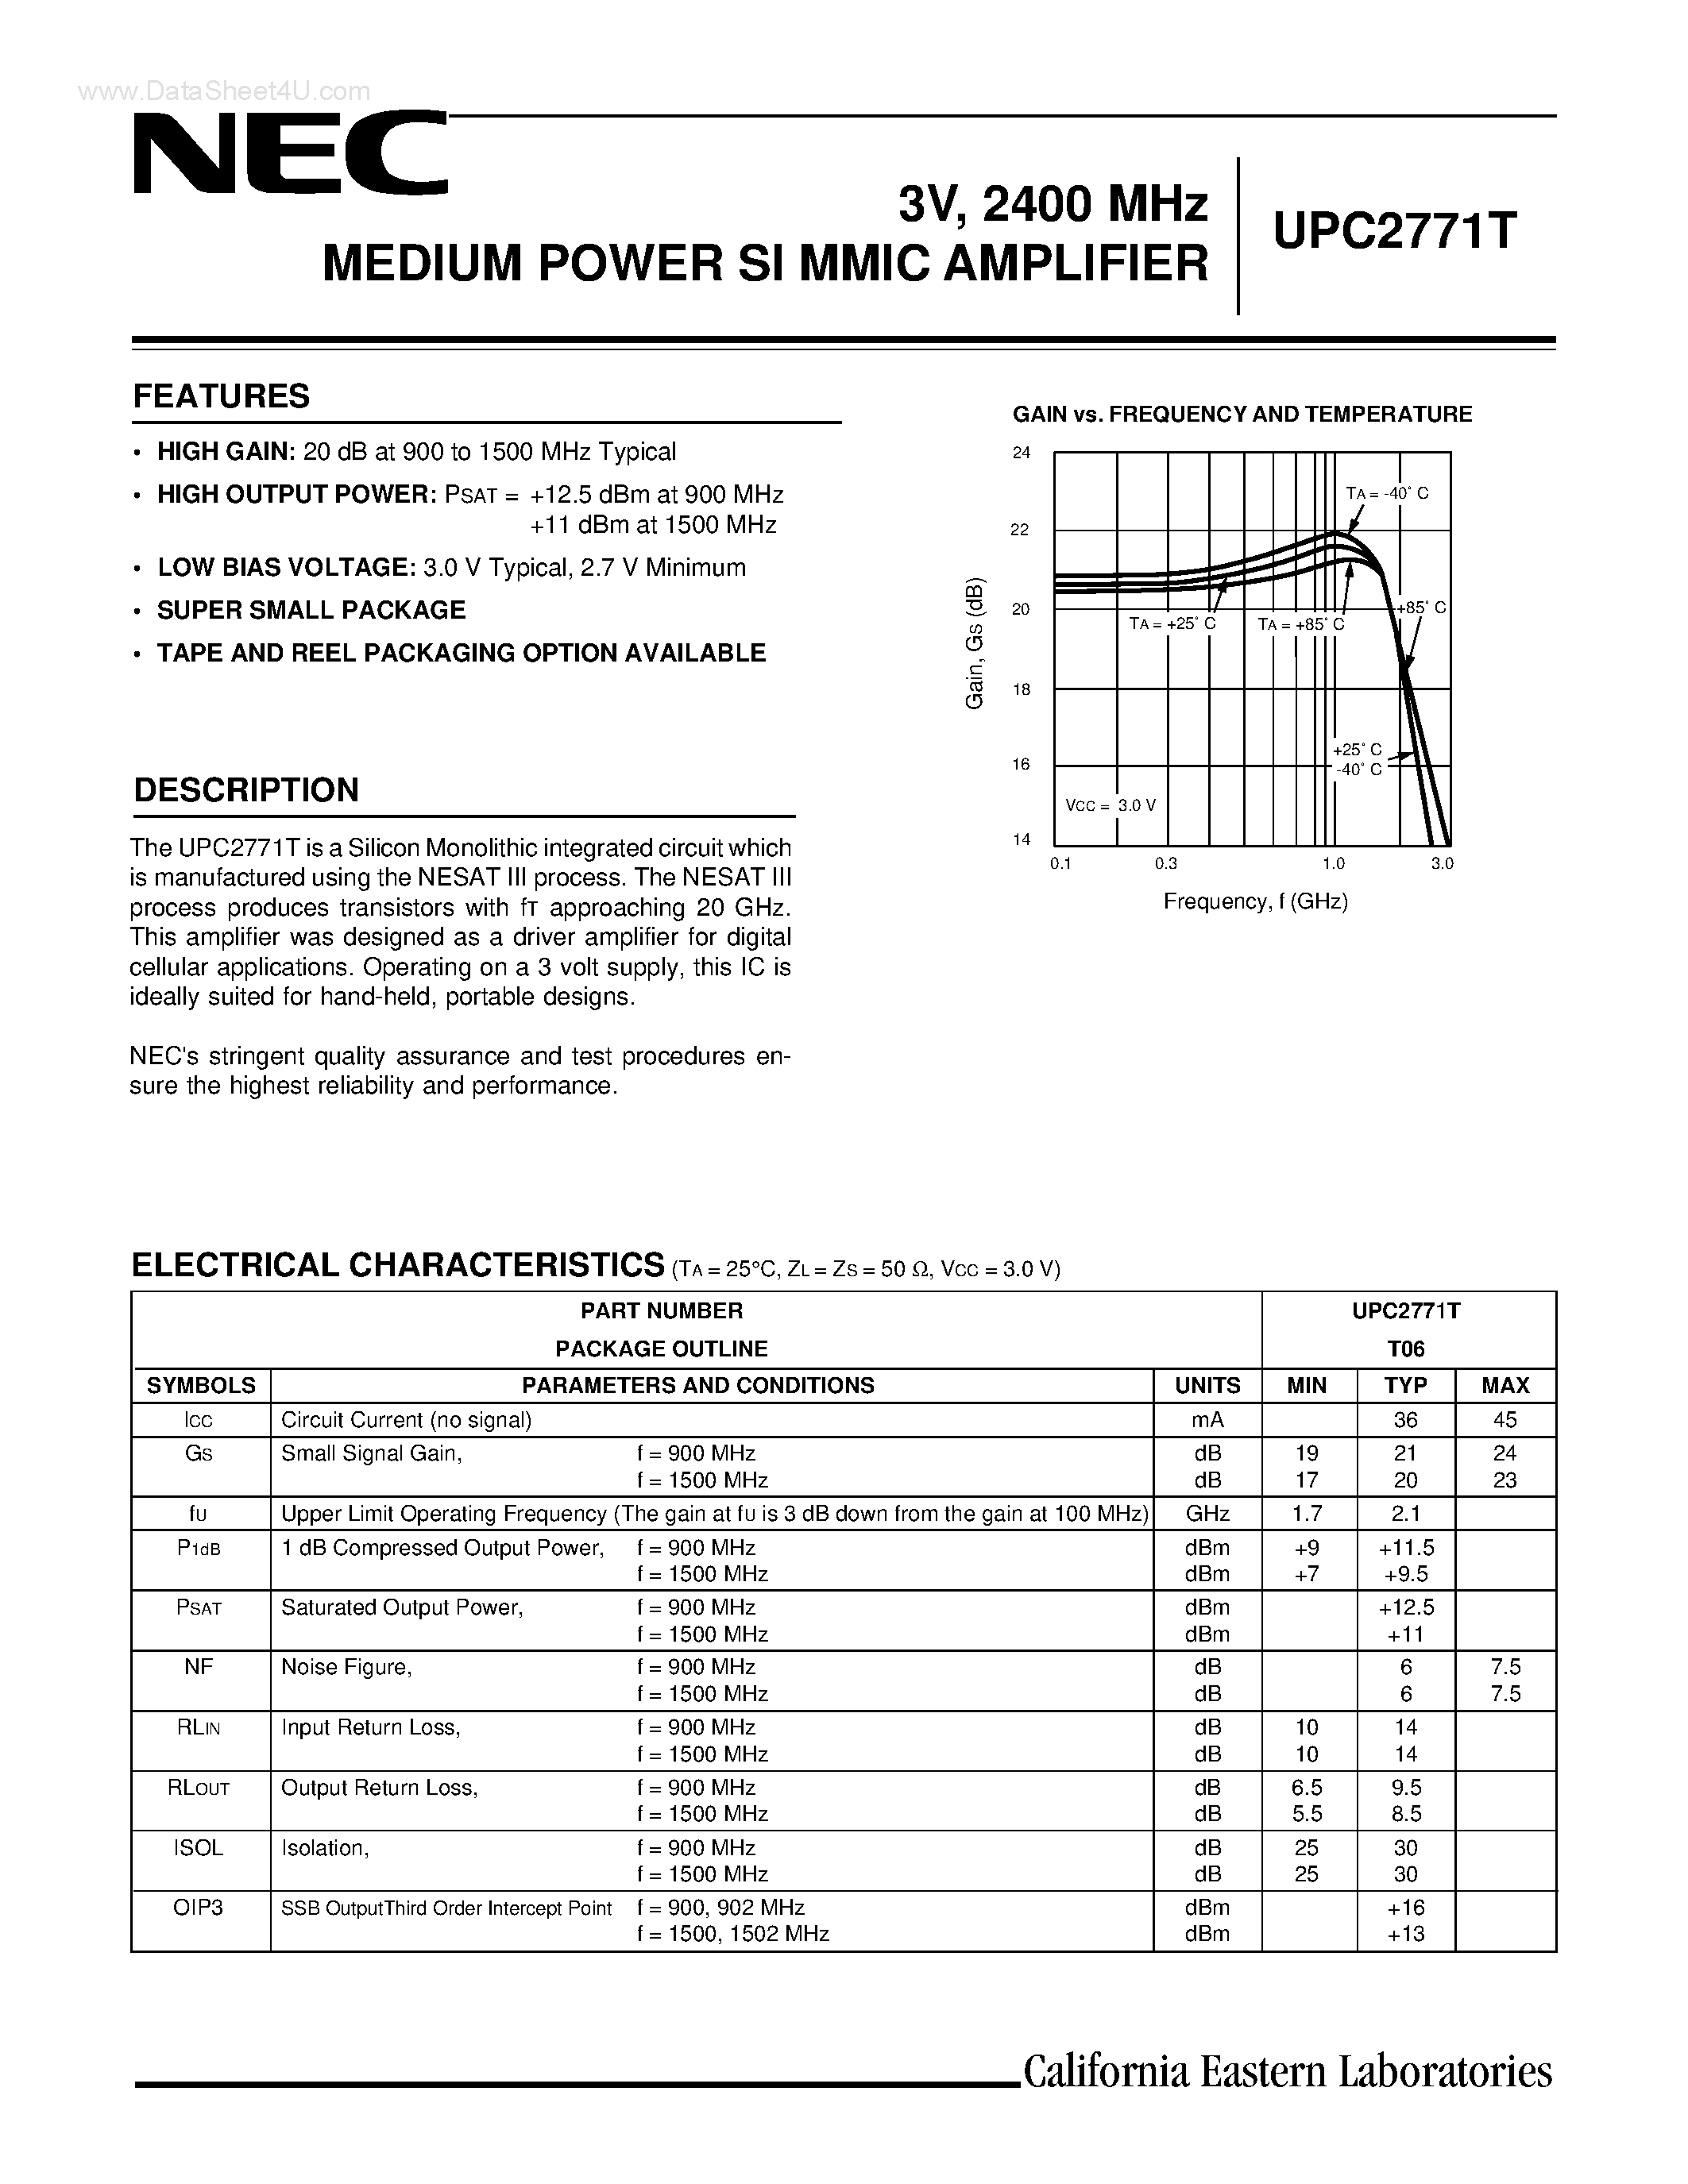 Datasheet UPC2771T - 3 V/ 2.9 GHz SILICON MMIC MEDIUM OUTPUT POWER AMPLIFIER FOR MOBILE COMMUNICATIONS page 1